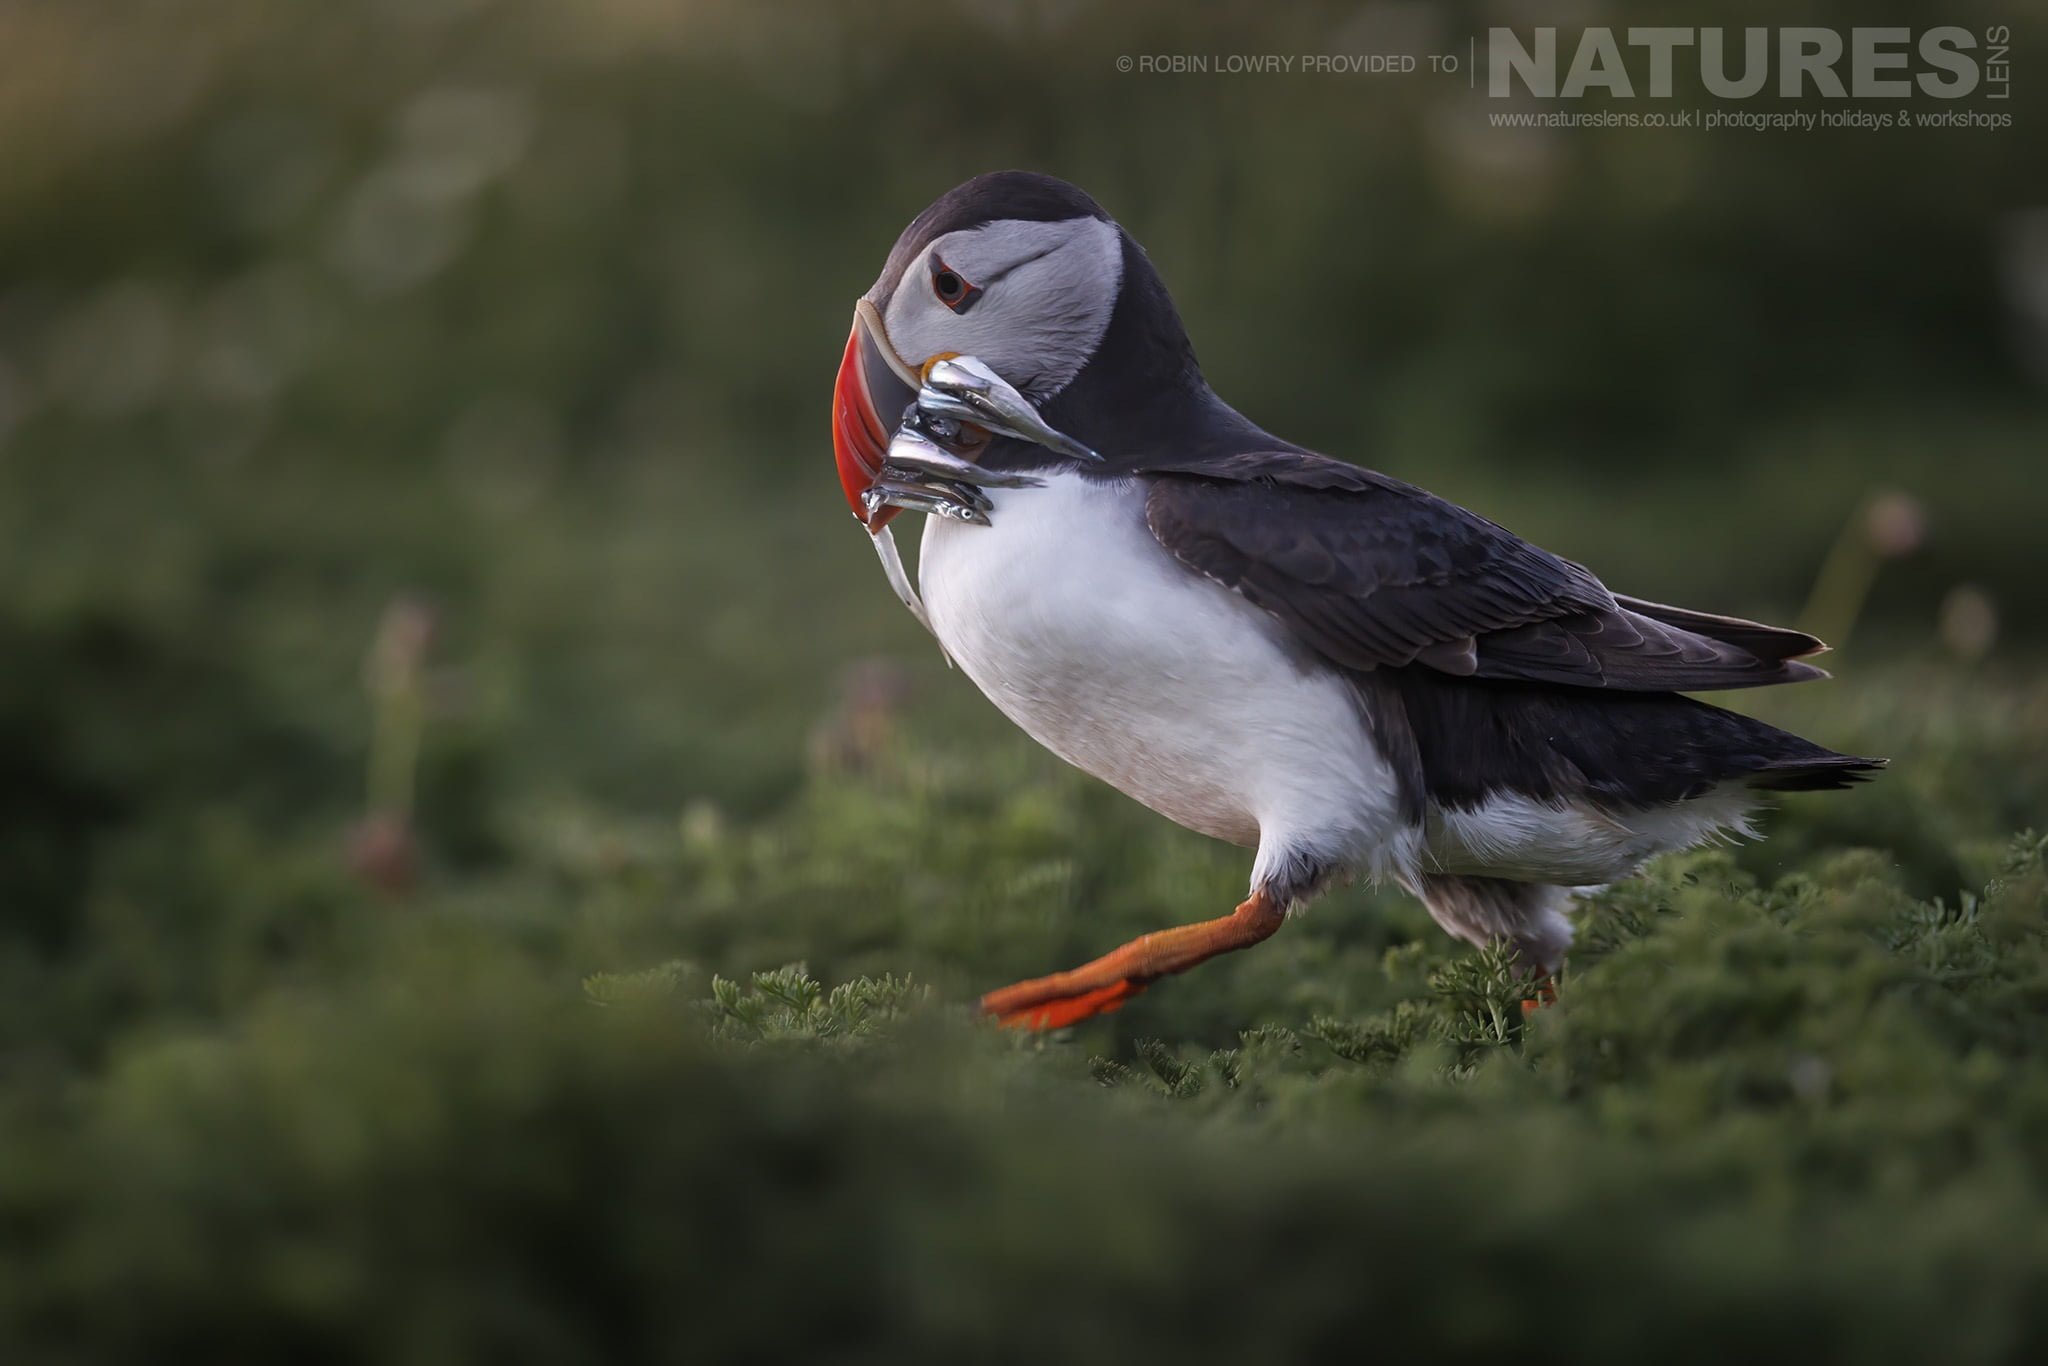 One Of The Puffins Of Skomer Returns To The Burrows With A Beak Full Of Sand Eels